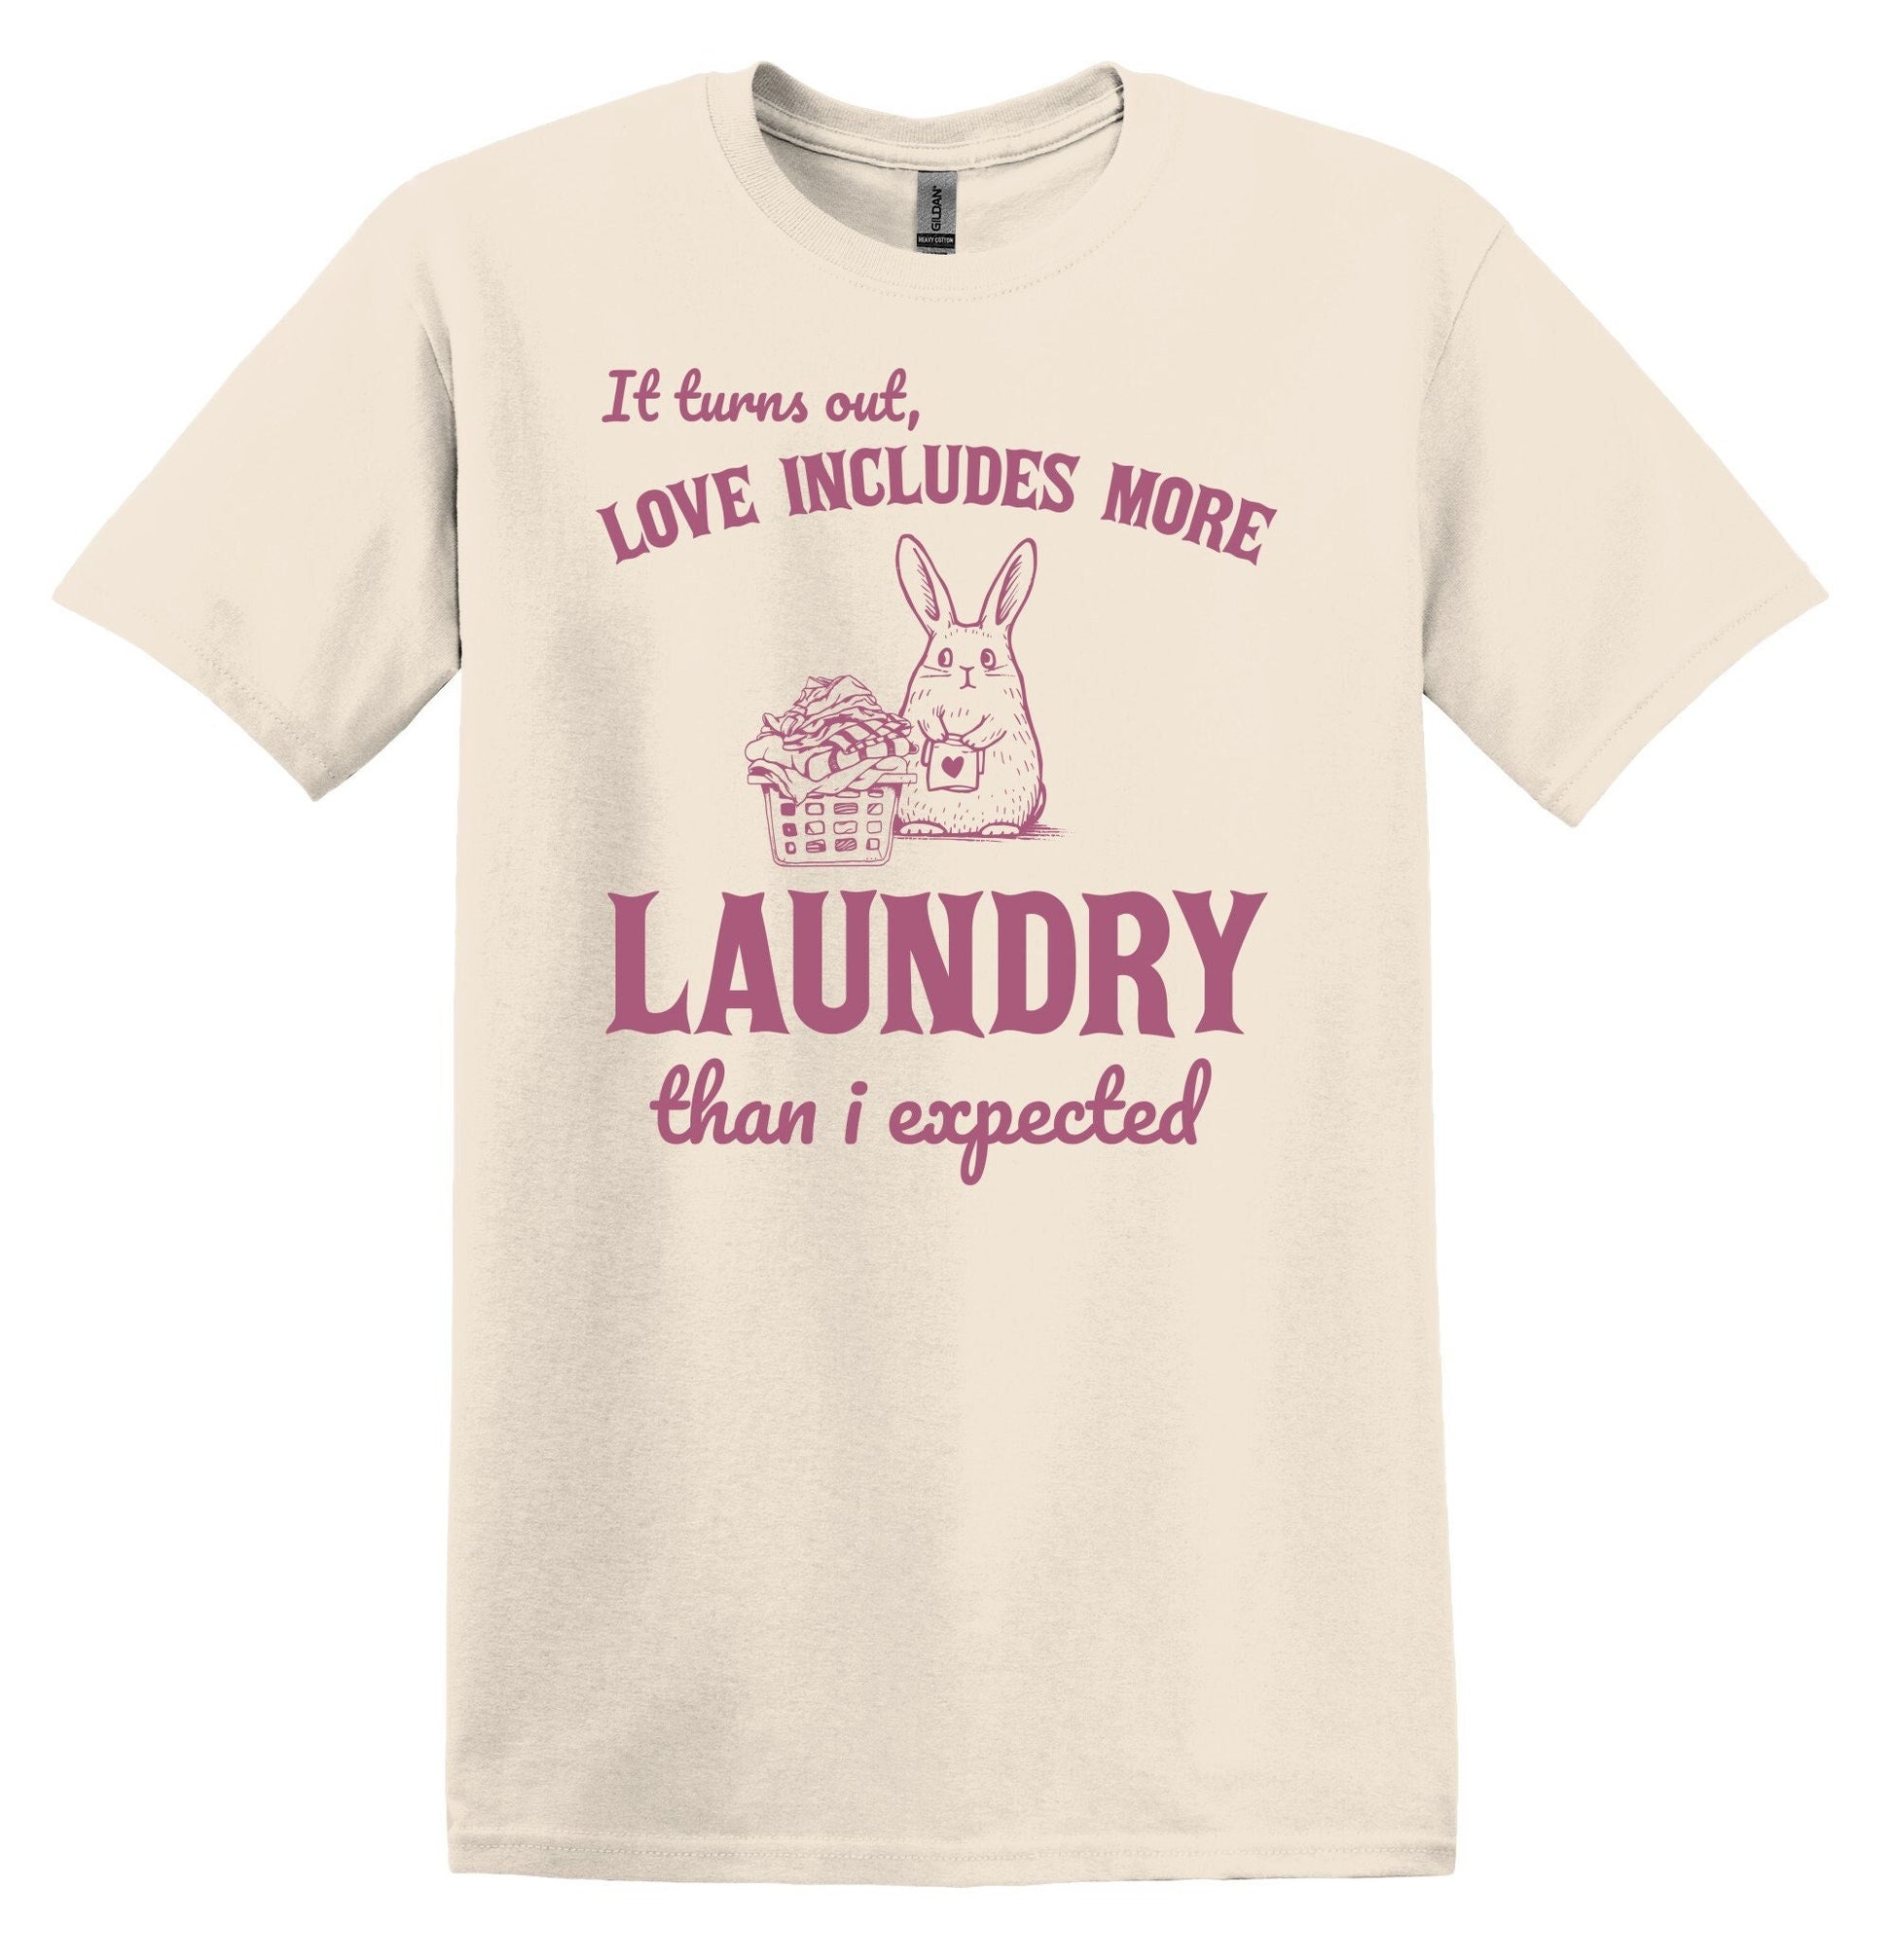 It Turns Out, Love Includes More Laundry than I Expected Shirt Graphic Shirt Funny Shirts Vintage Funny T Shirts Minimalist Shirt